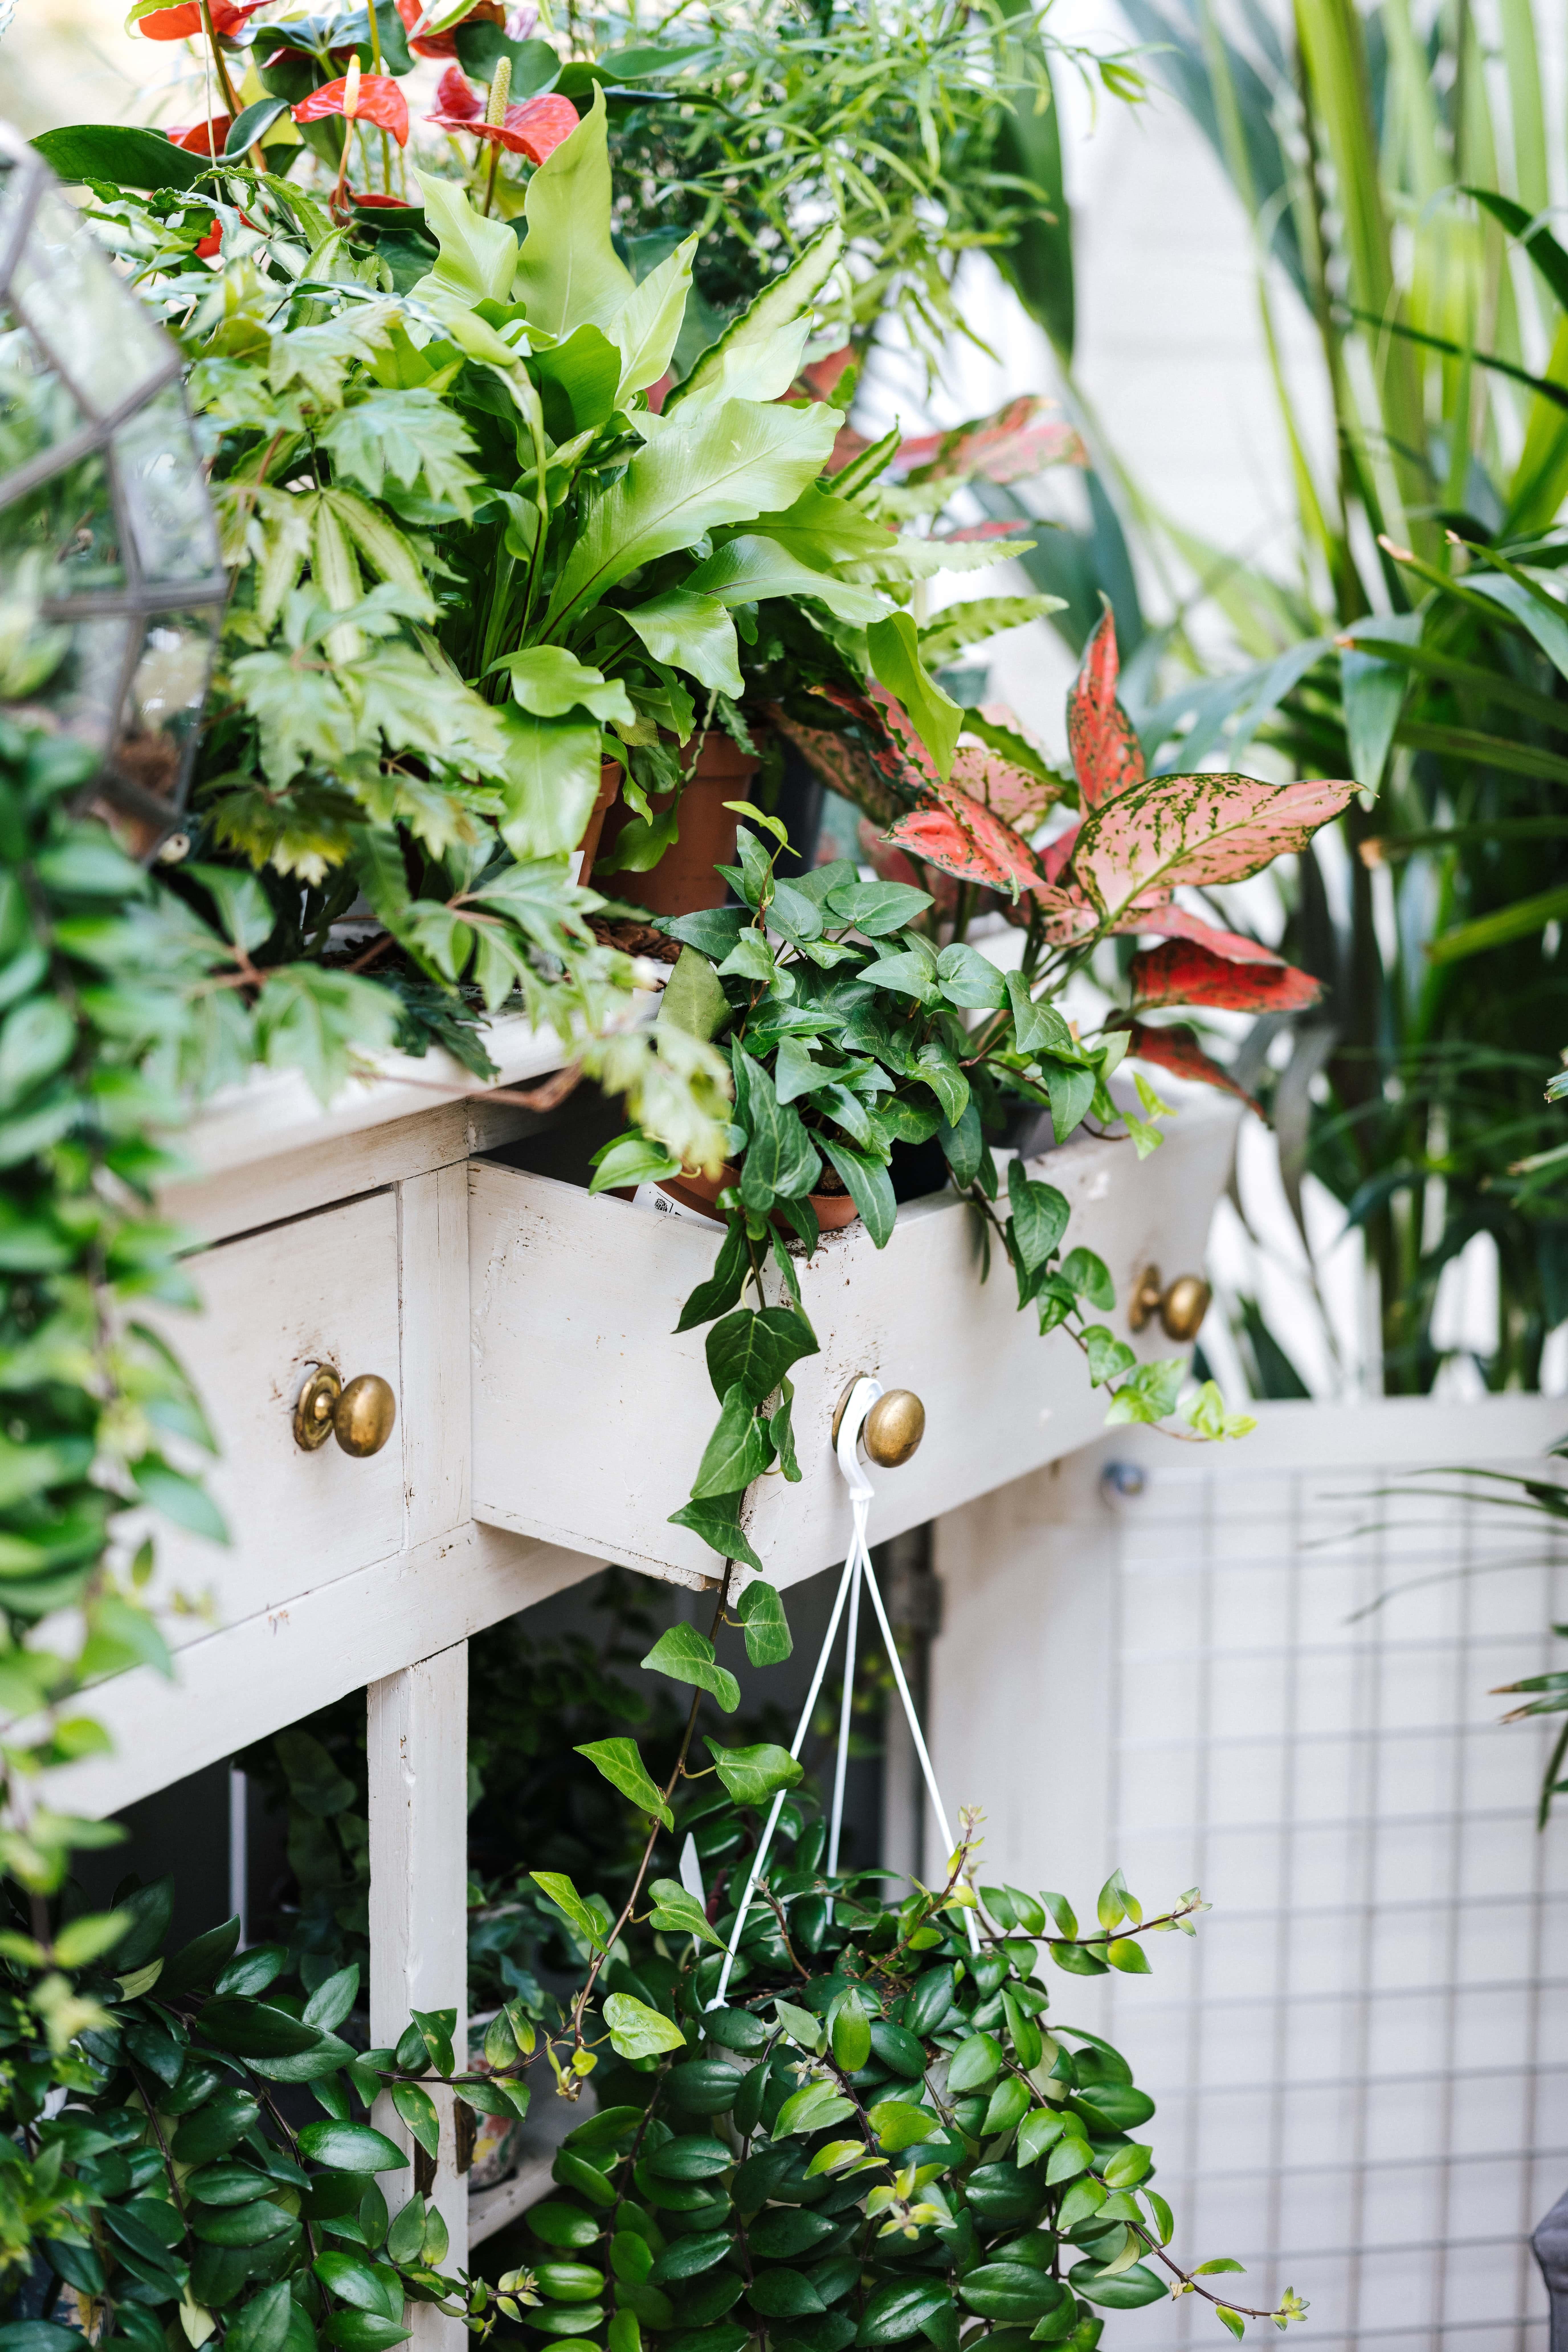 An image of houseplants spilling out of a white dresser